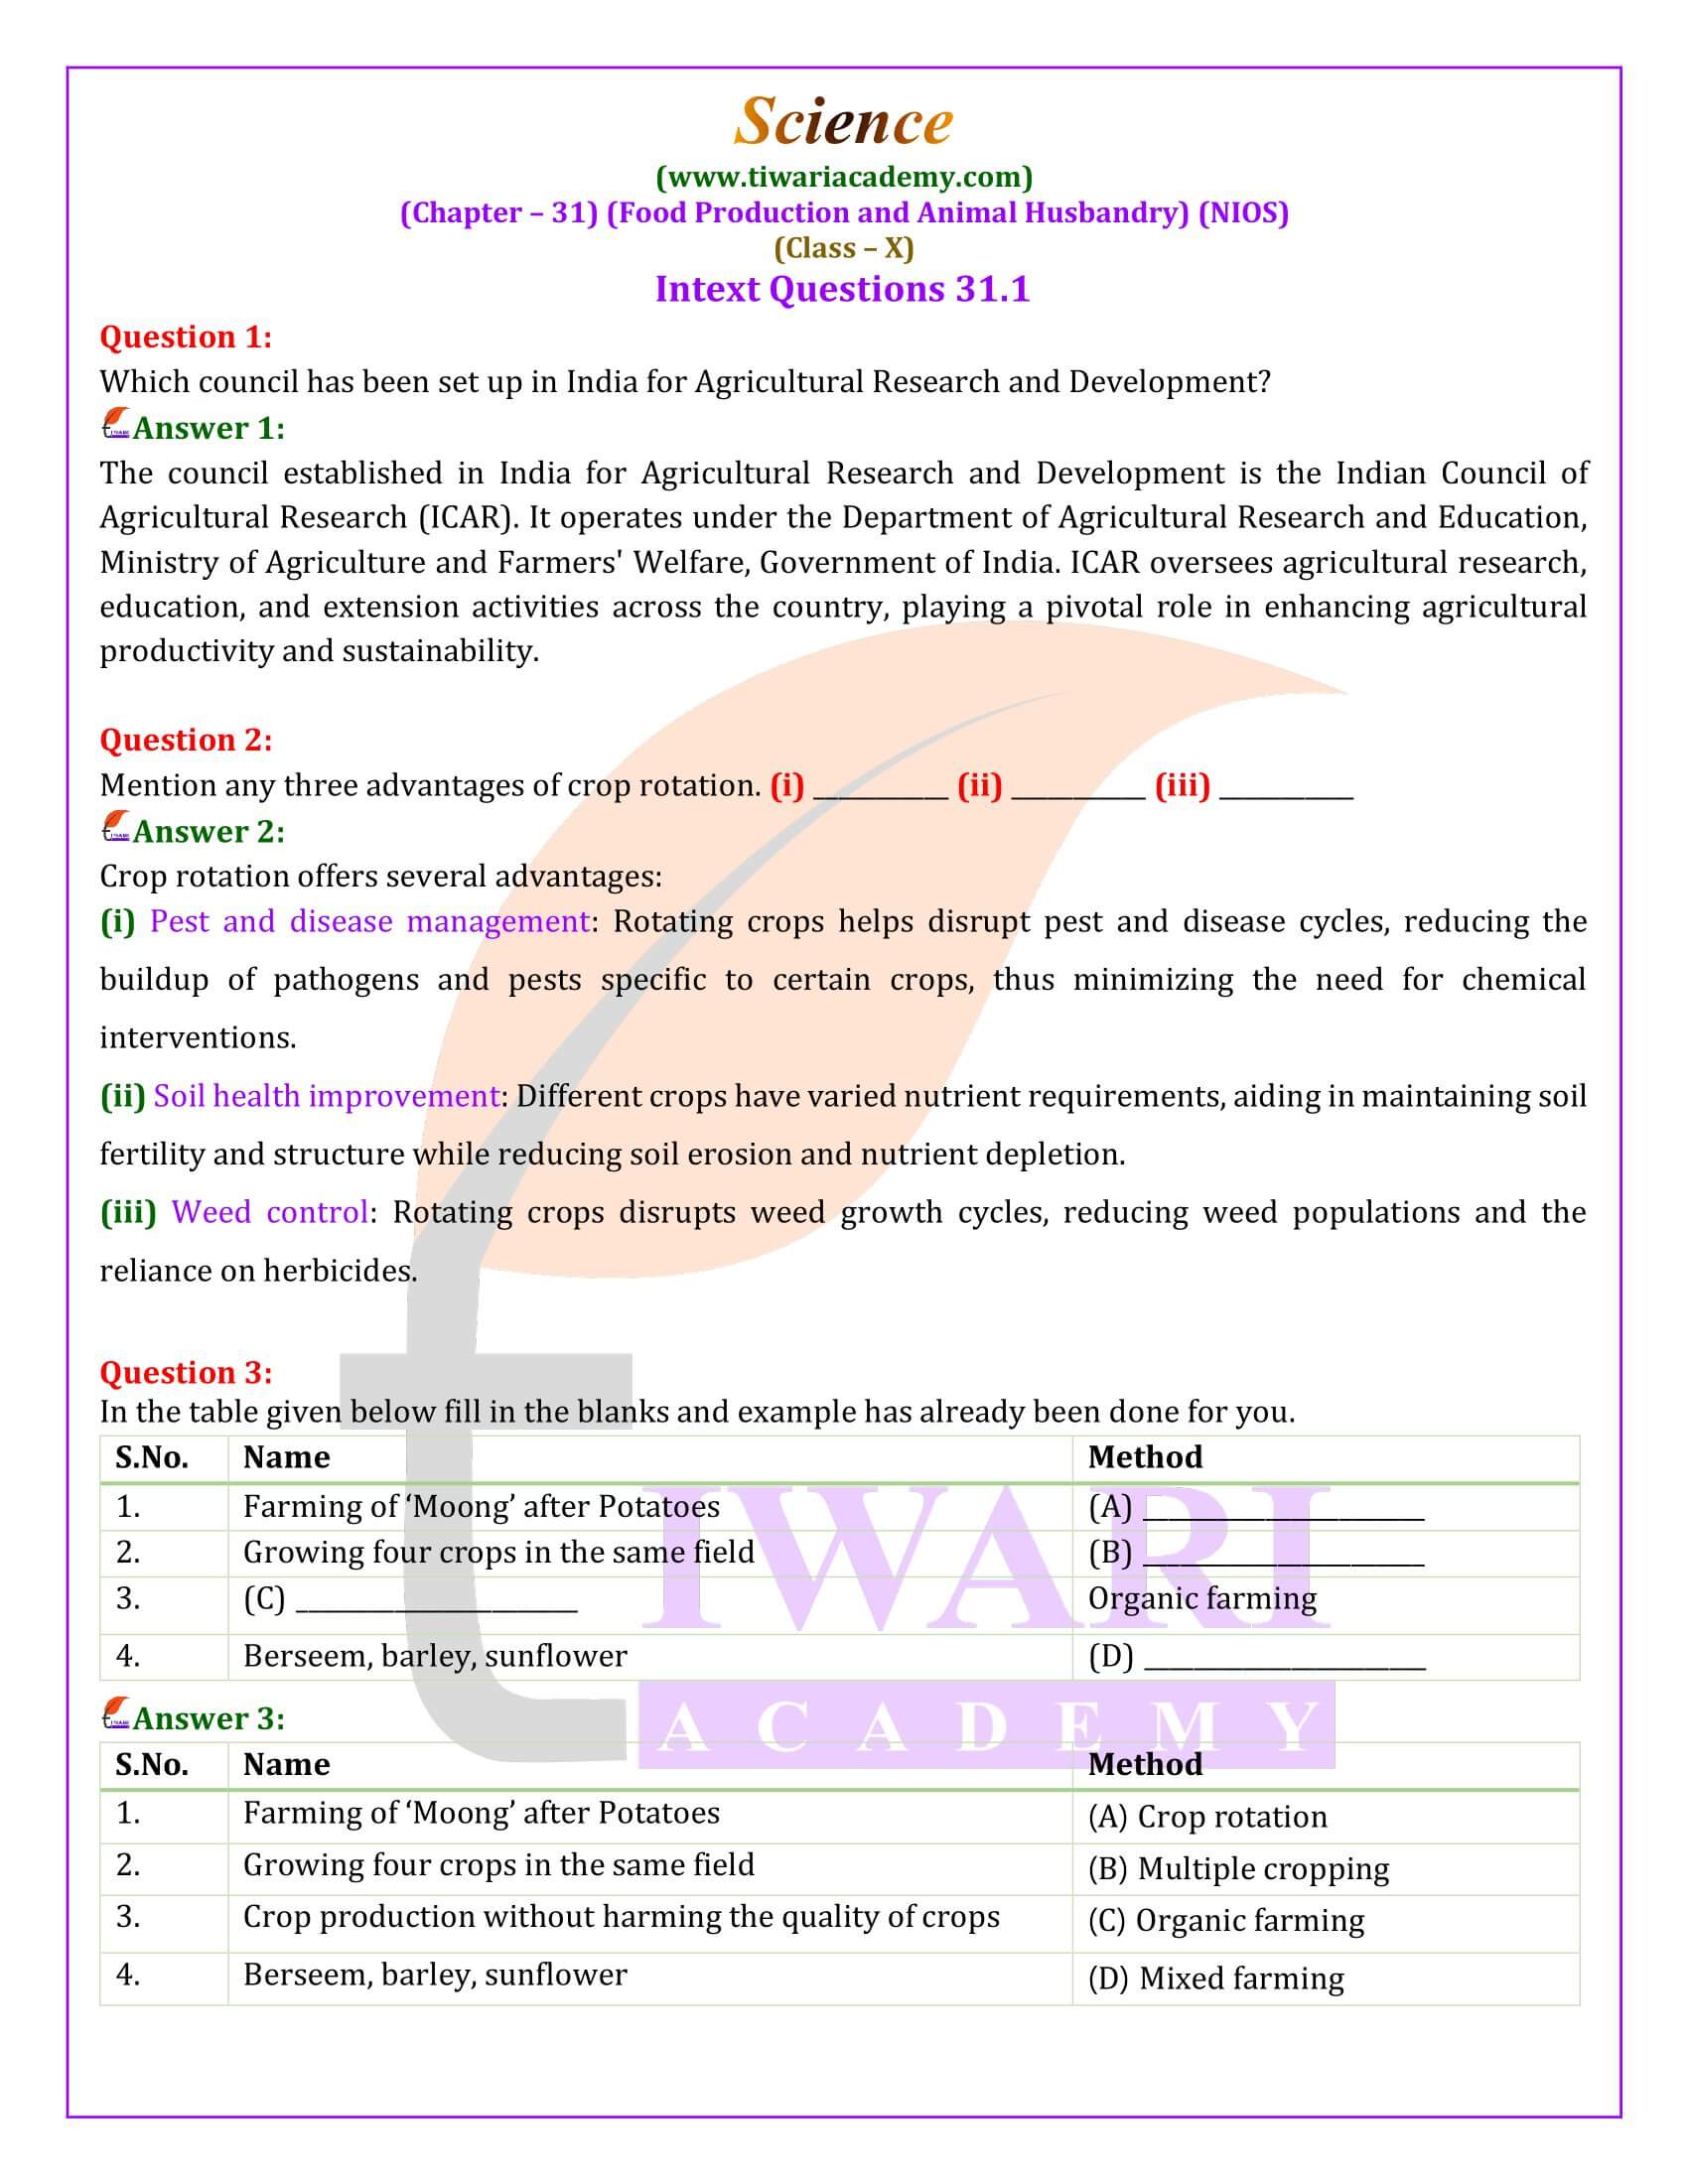 NIOS Class 10 Science Chapter 31 Food Production Answers